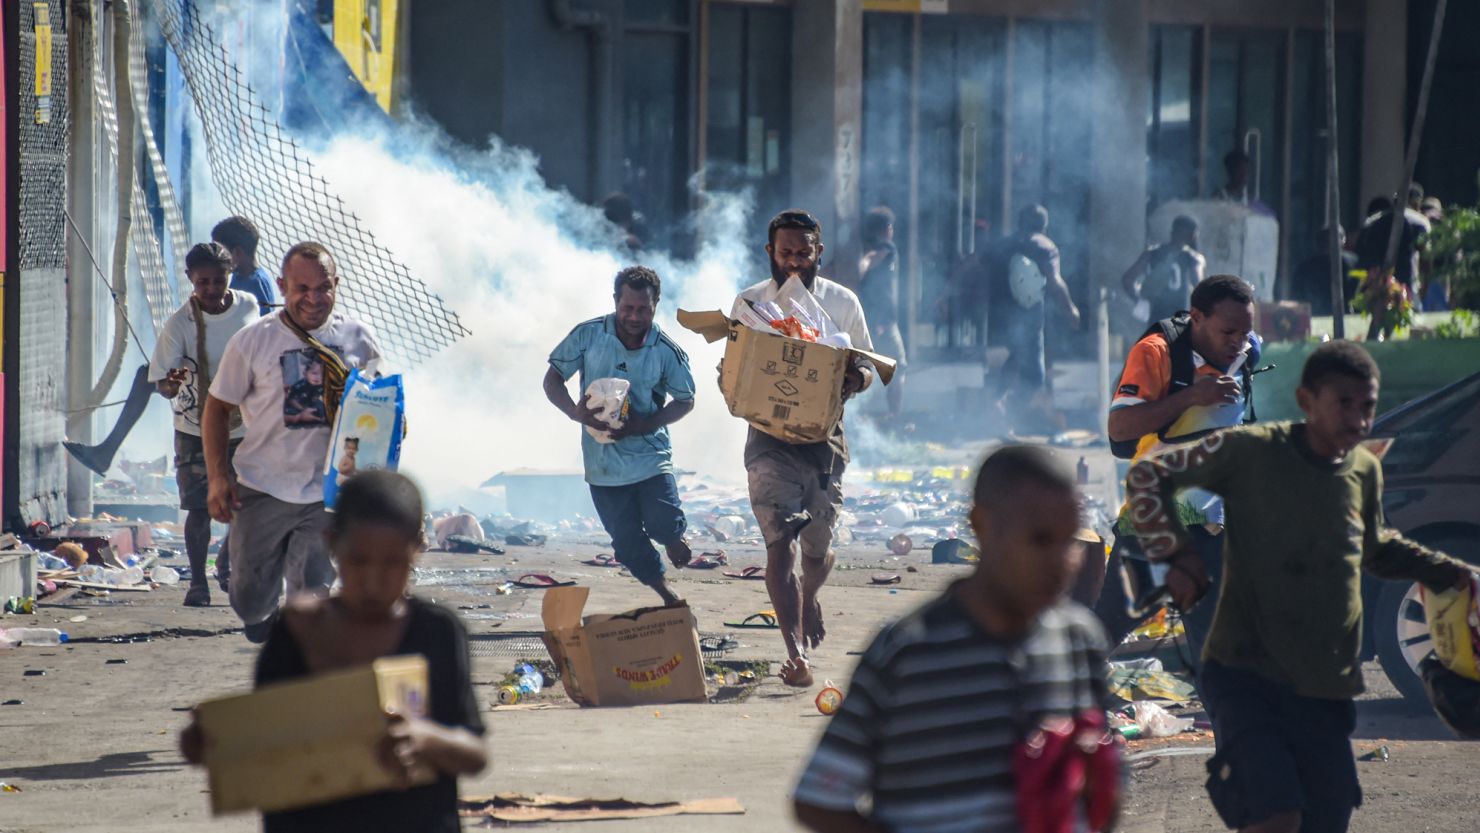 TOPSHOT - People run with merchandise as crowds leave shops with looted goods amid a state of unrest in Port Moresby on January 10, 2024. A festering pay dispute involving Papua New Guinea's security forces on January 10 sparked angry protests in the capital, where a crowd torched a police car outside the prime minister's office. By Wednesday afternoon pockets of unrest had spread through the capital Port Moresby, with video clips on social media showing crowds looting shops and stretched police scrambling to restore order. (Photo by Andrew KUTAN / AFP) (Photo by ANDREW KUTAN/AFP via Getty Images)